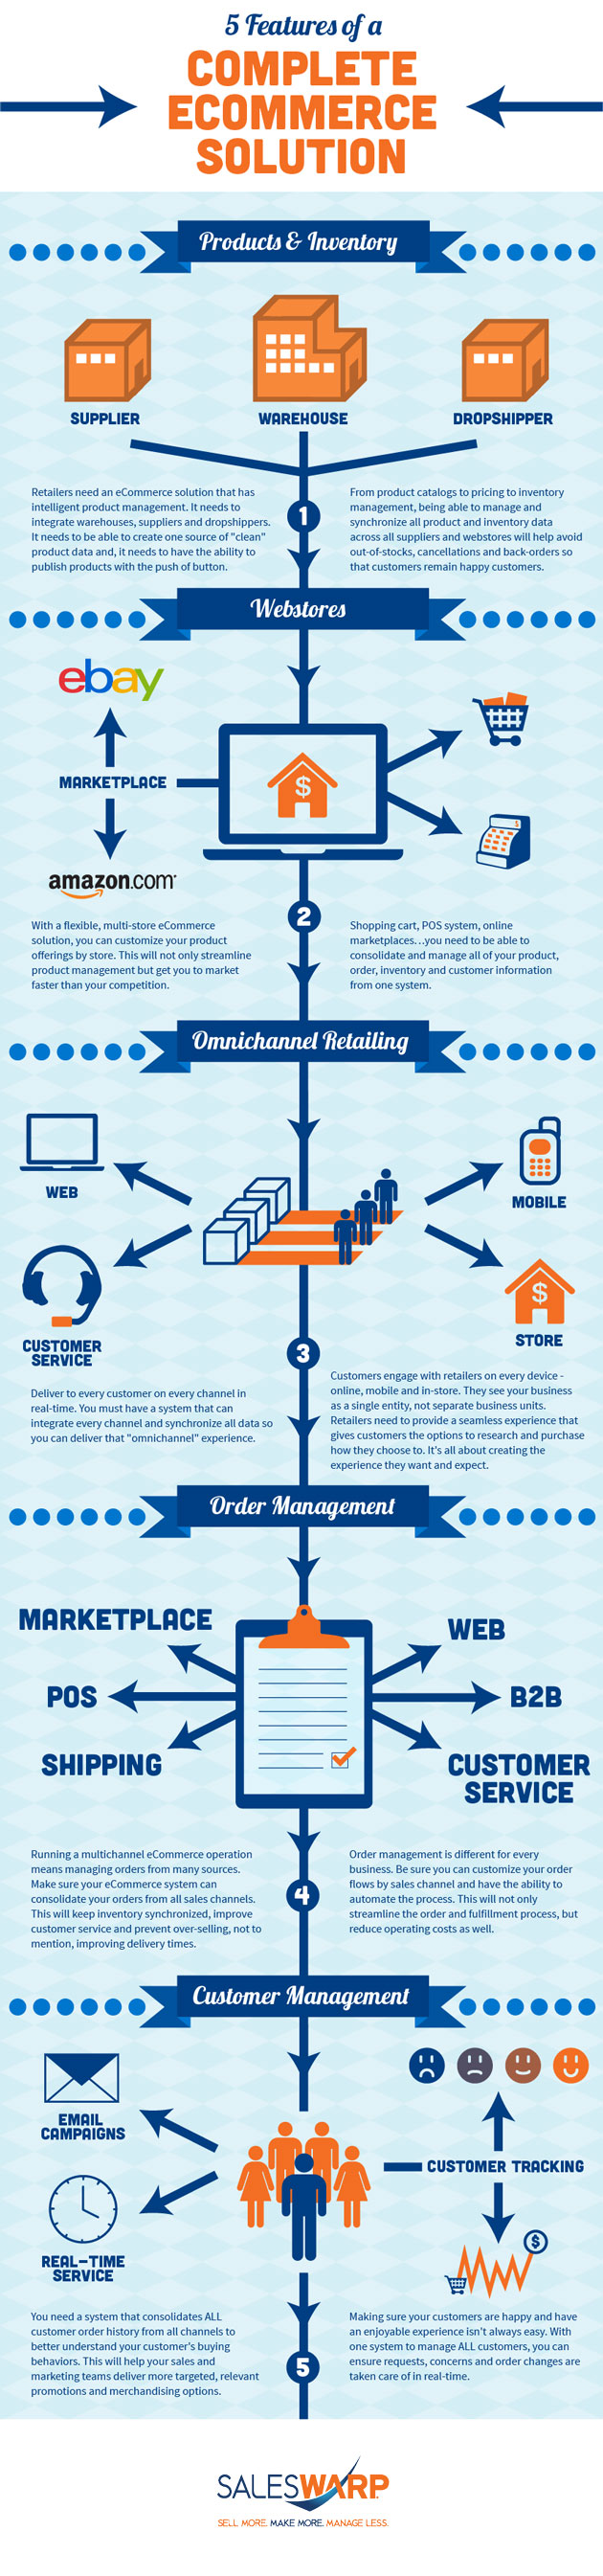 5 Features of a Complete eCommerce Solution Infographic